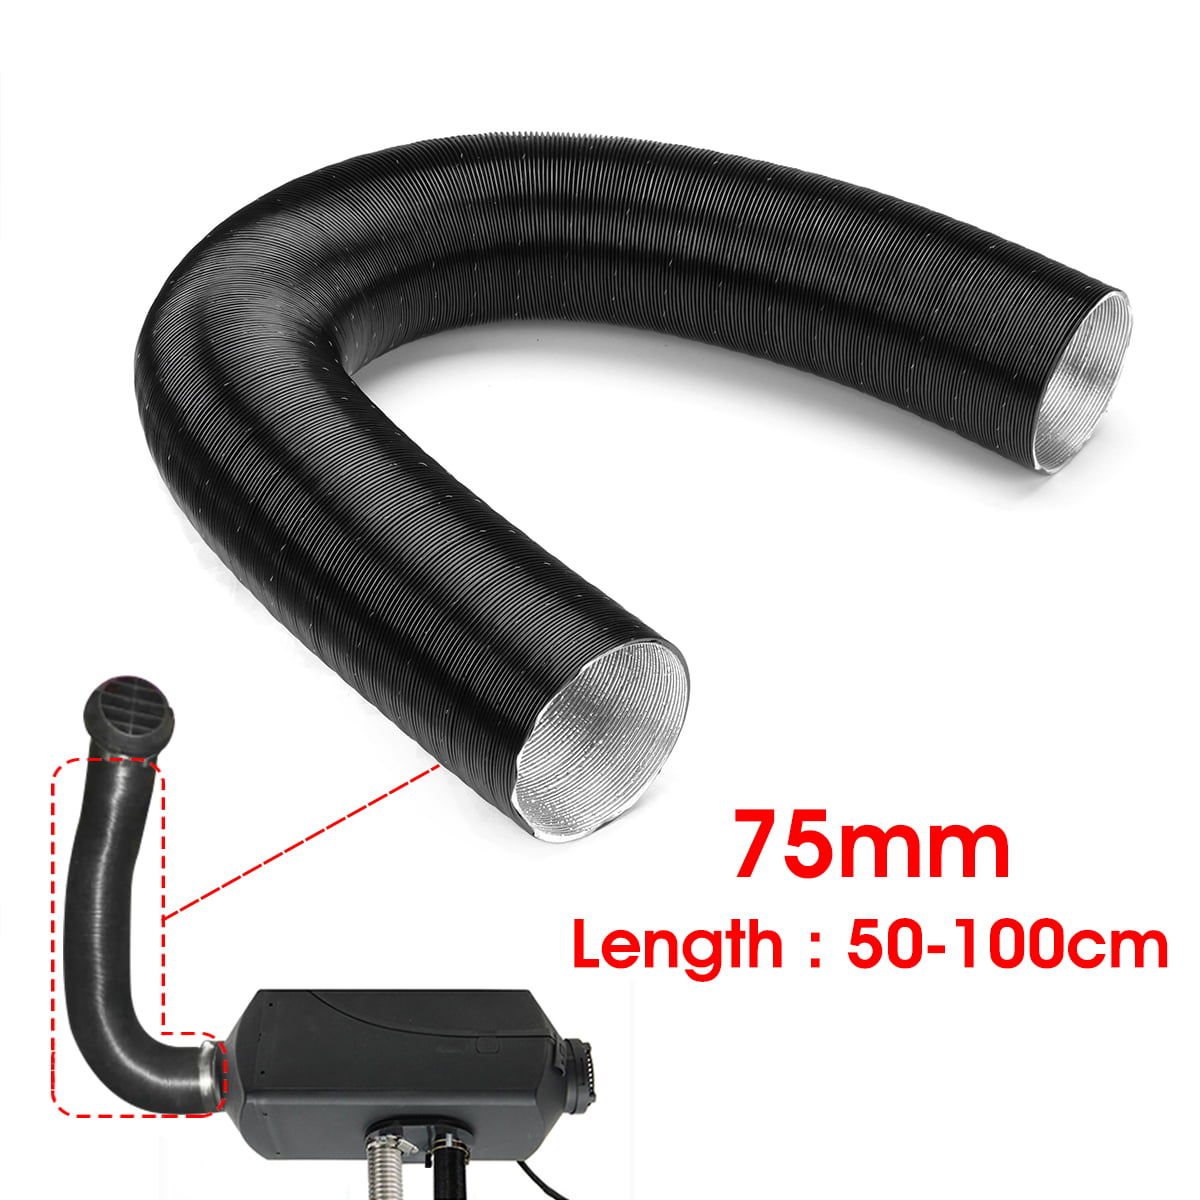 linger 75mm Heater Duct Pipe Hot Air Ducting 10025 Fit for Webasto Diesel Heater Aluminum New and 